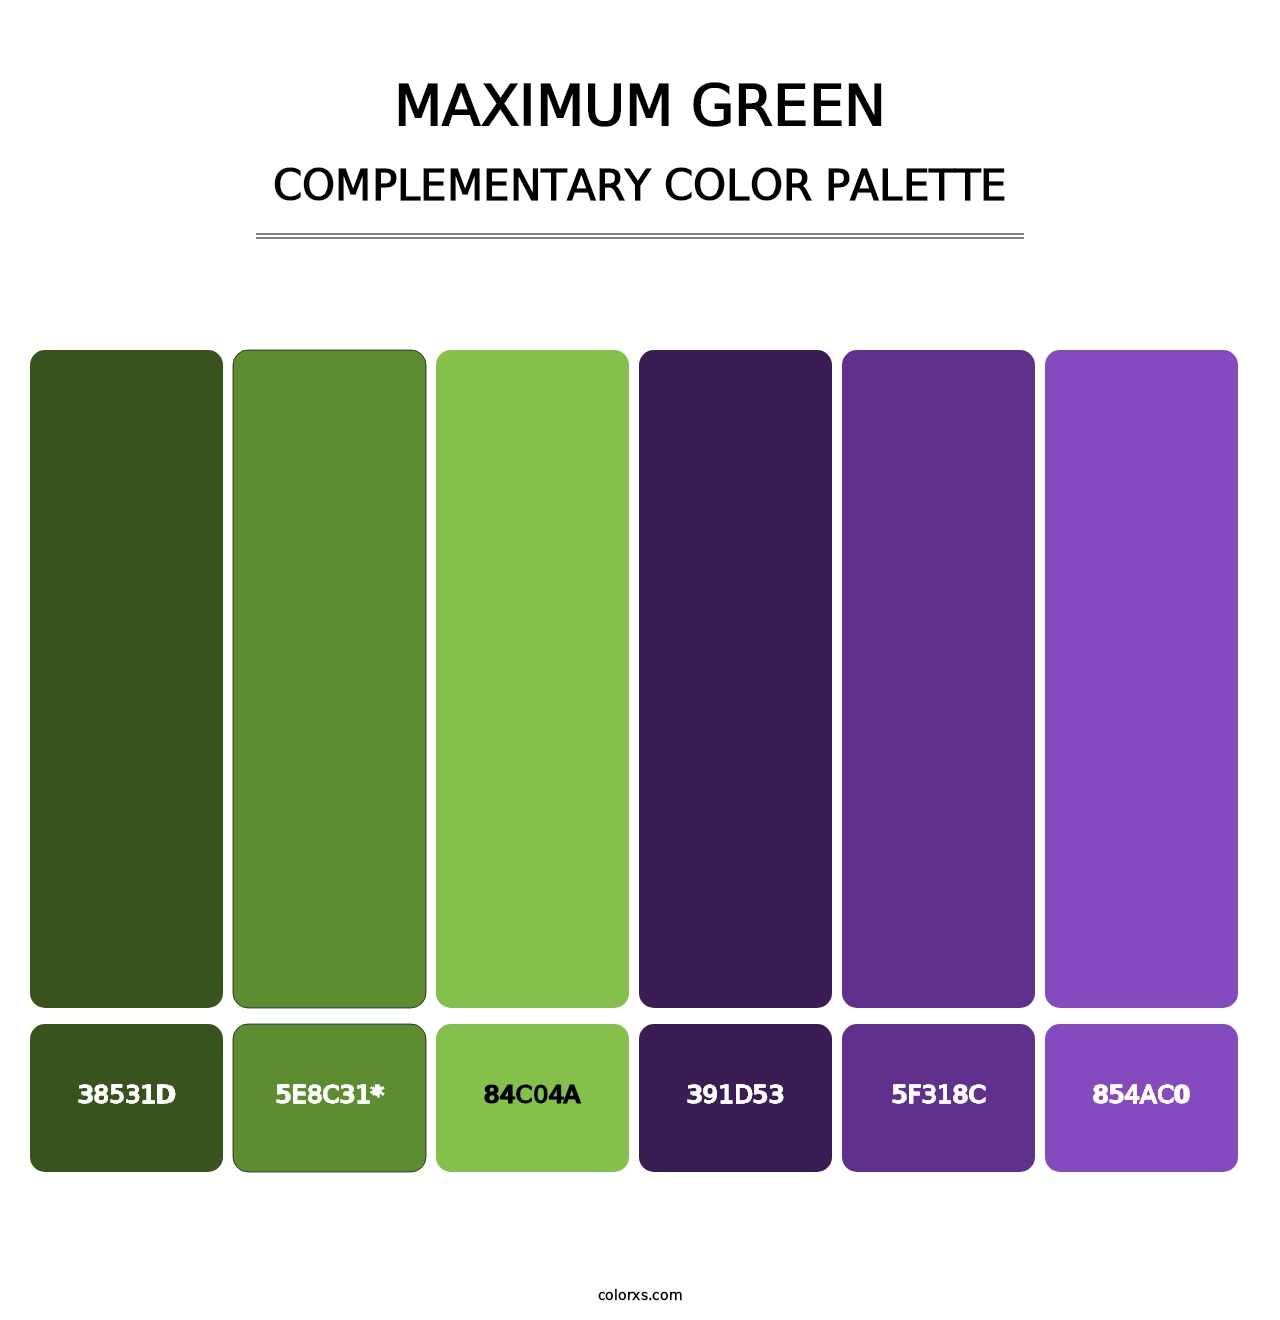 Maximum Green - Complementary Color Palette